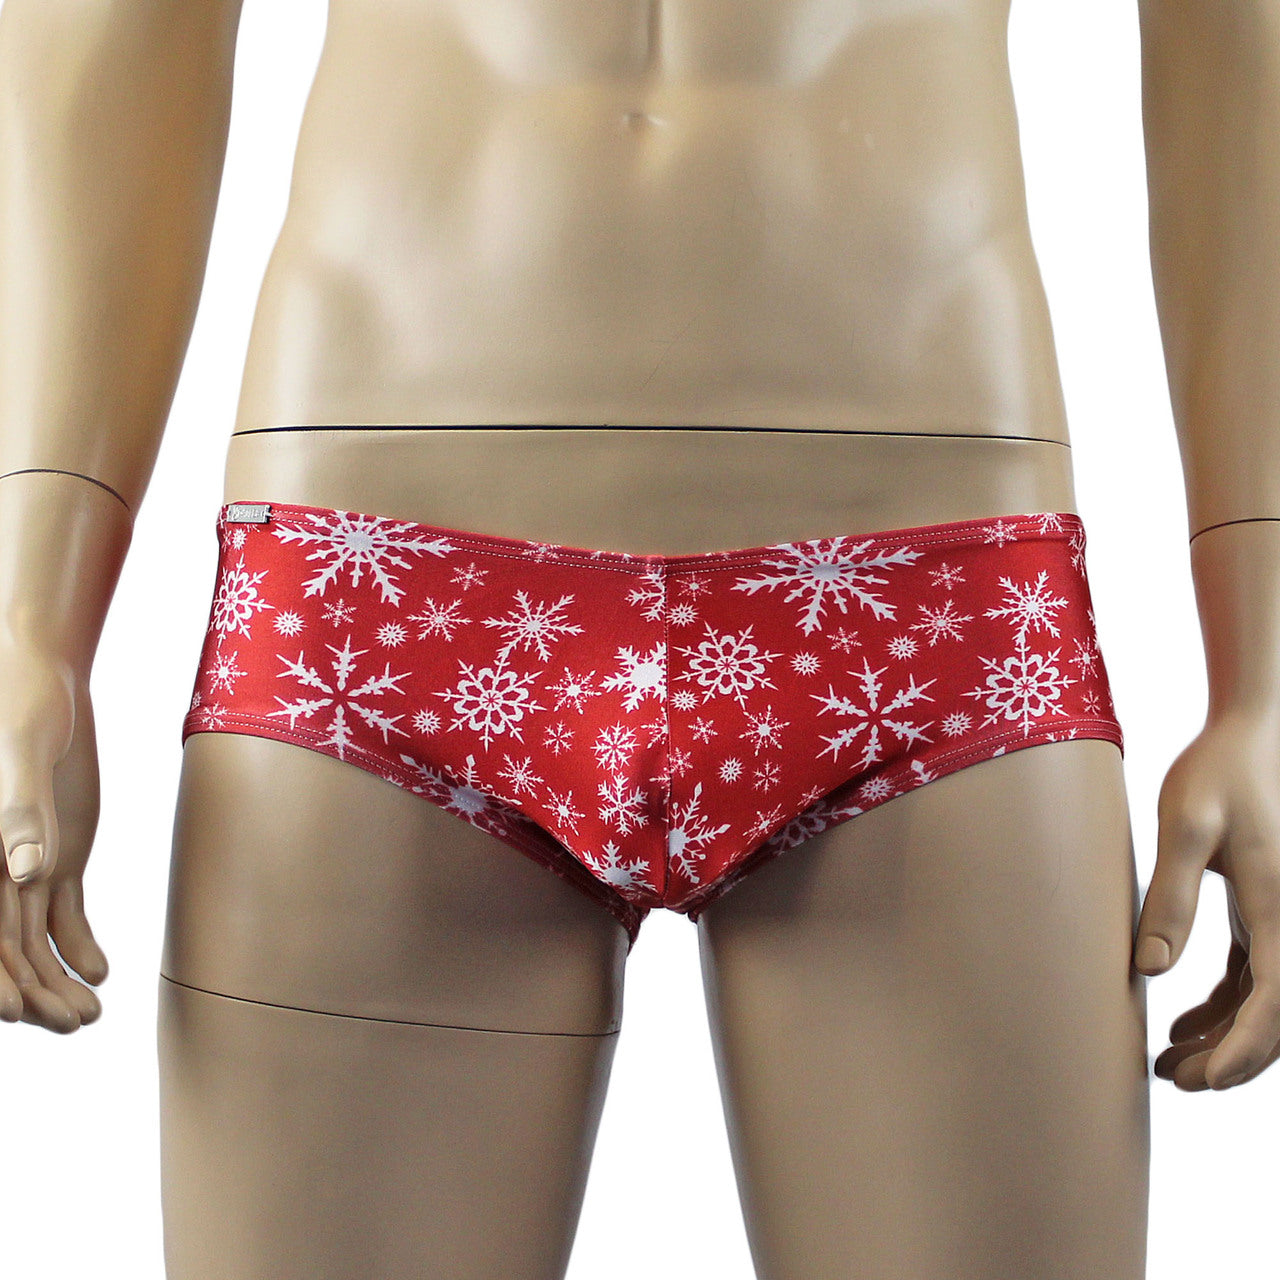 Mens Snowflake Print Spandex Low Cut Boxer Brief Red and White